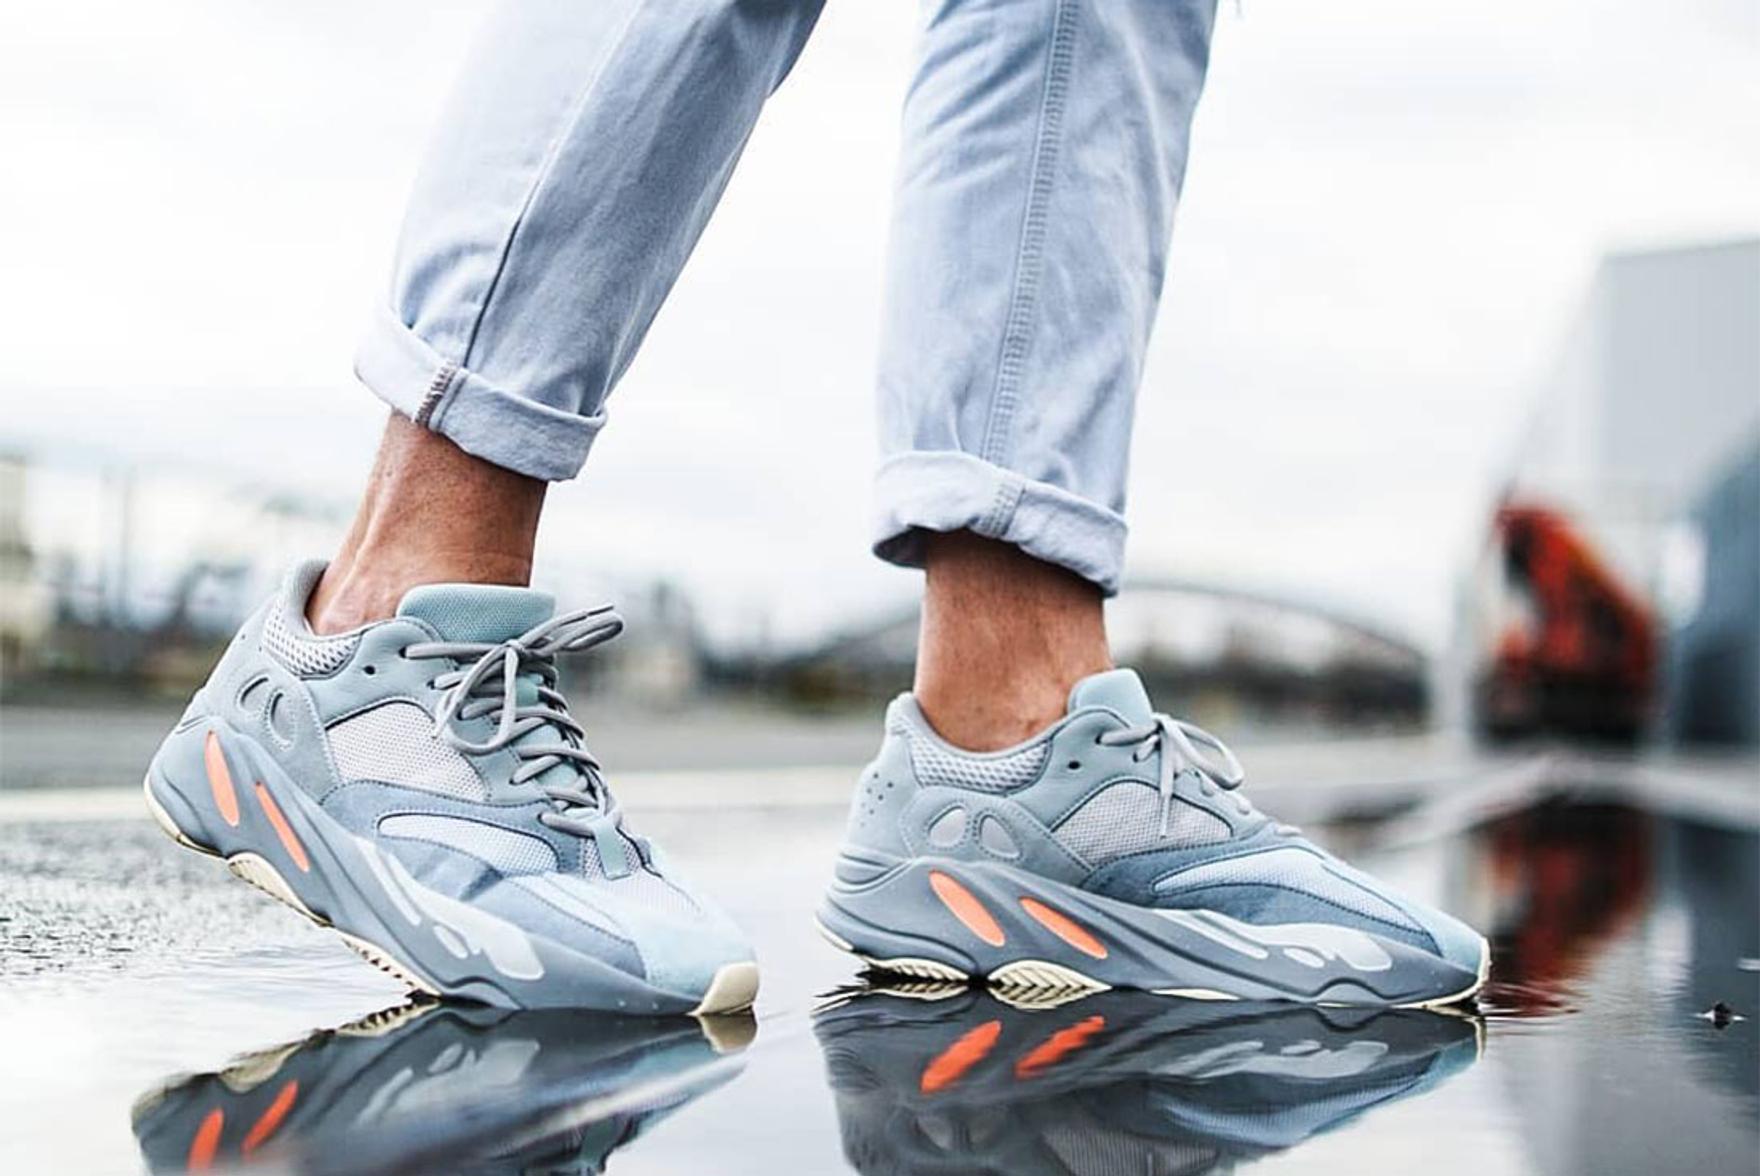 Here's How People Are Styling the Yeezy 700 'Inertia'